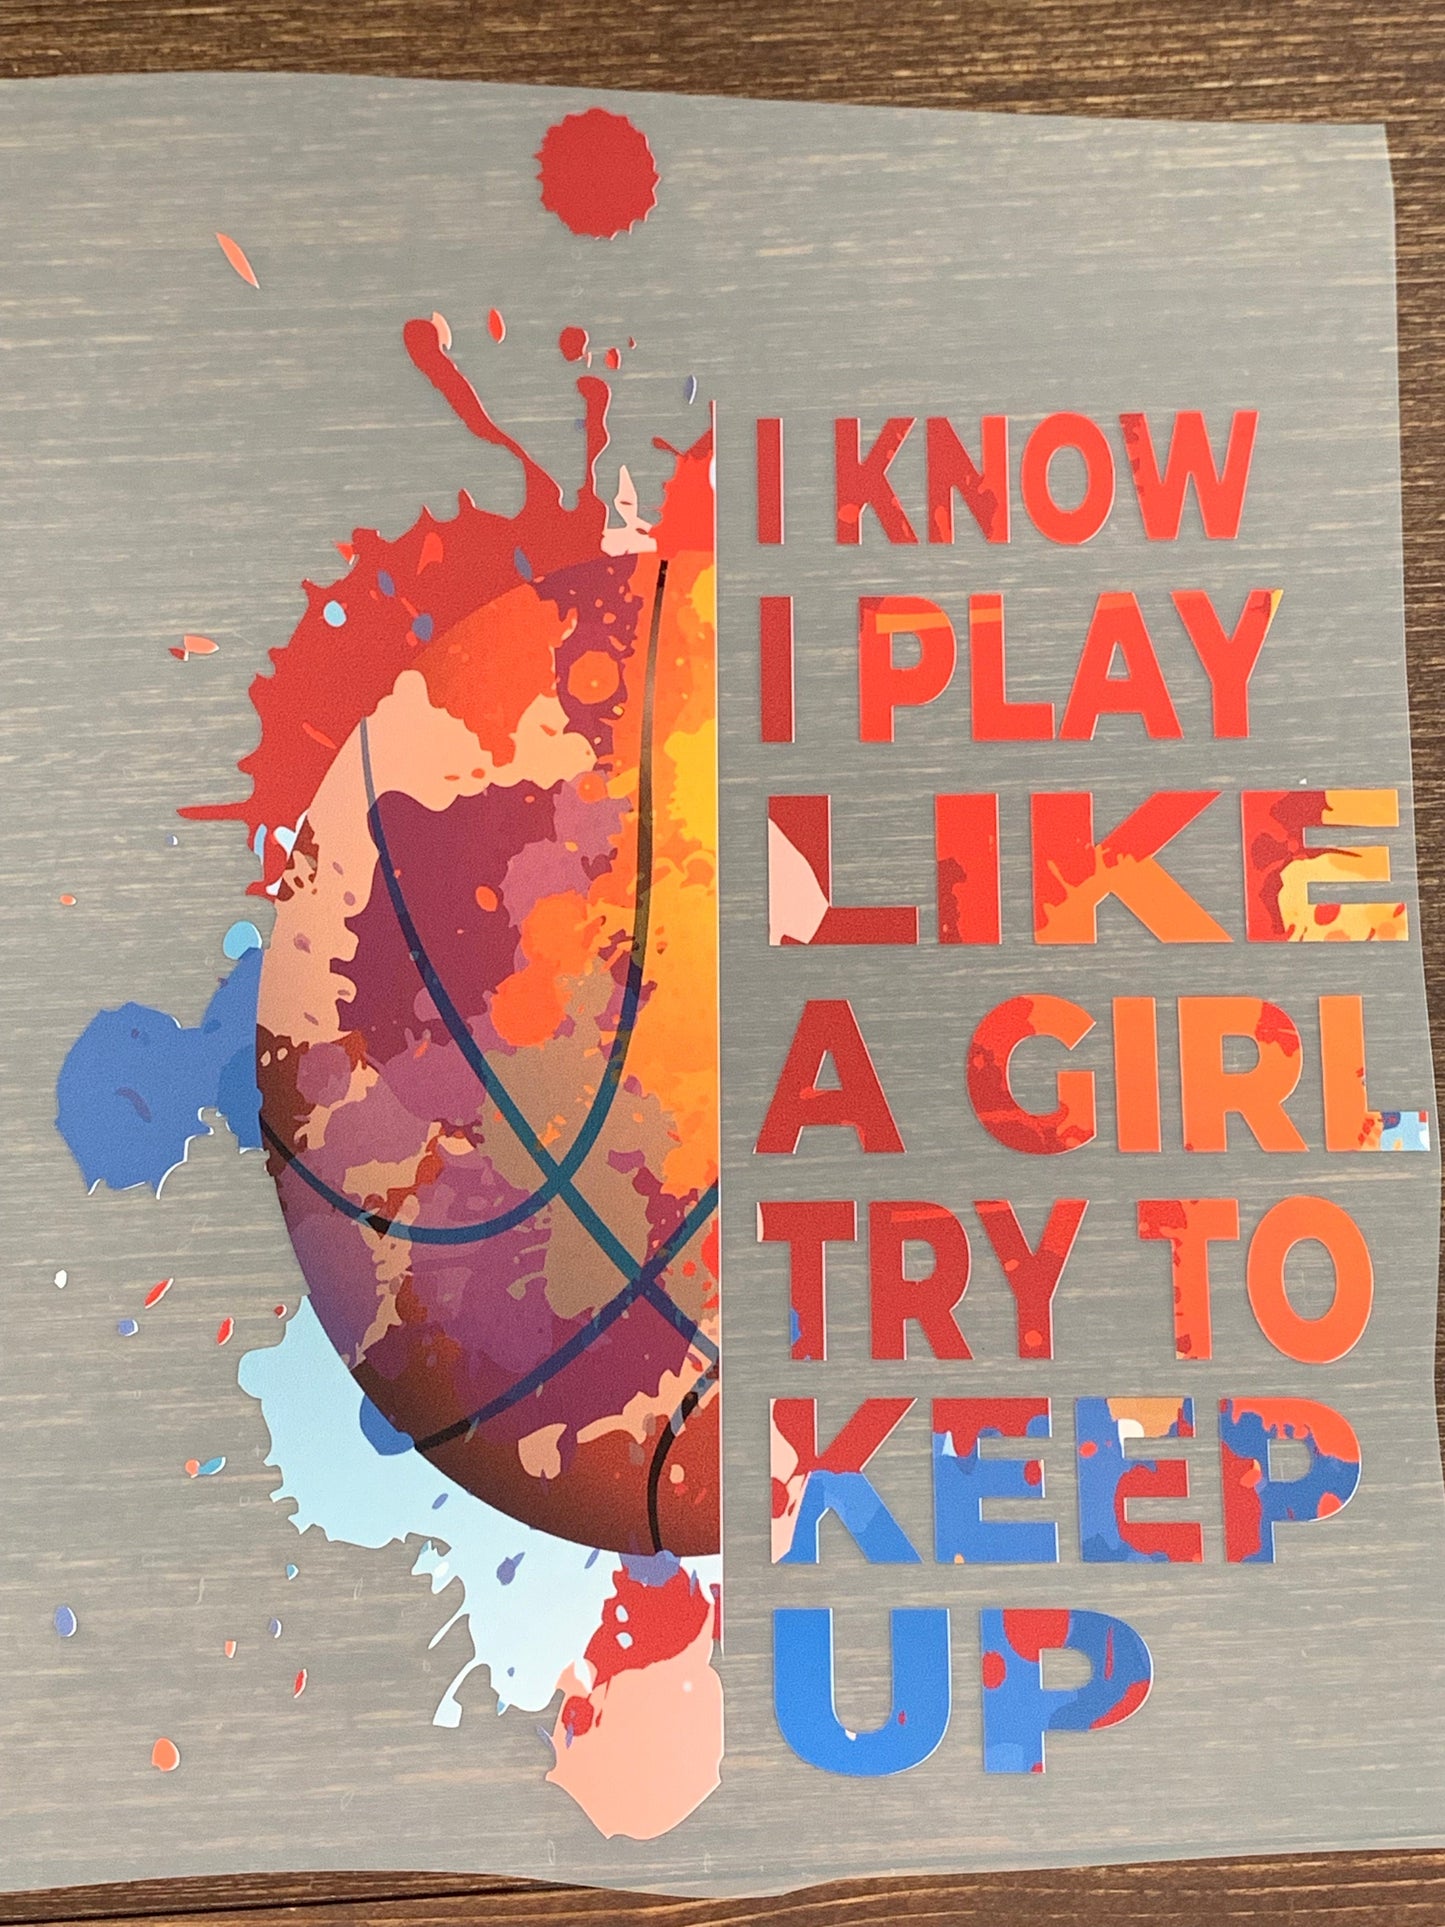 Basketball I know I play like a girl try to keep up DTF TRANSFERPRINT TO ORDER